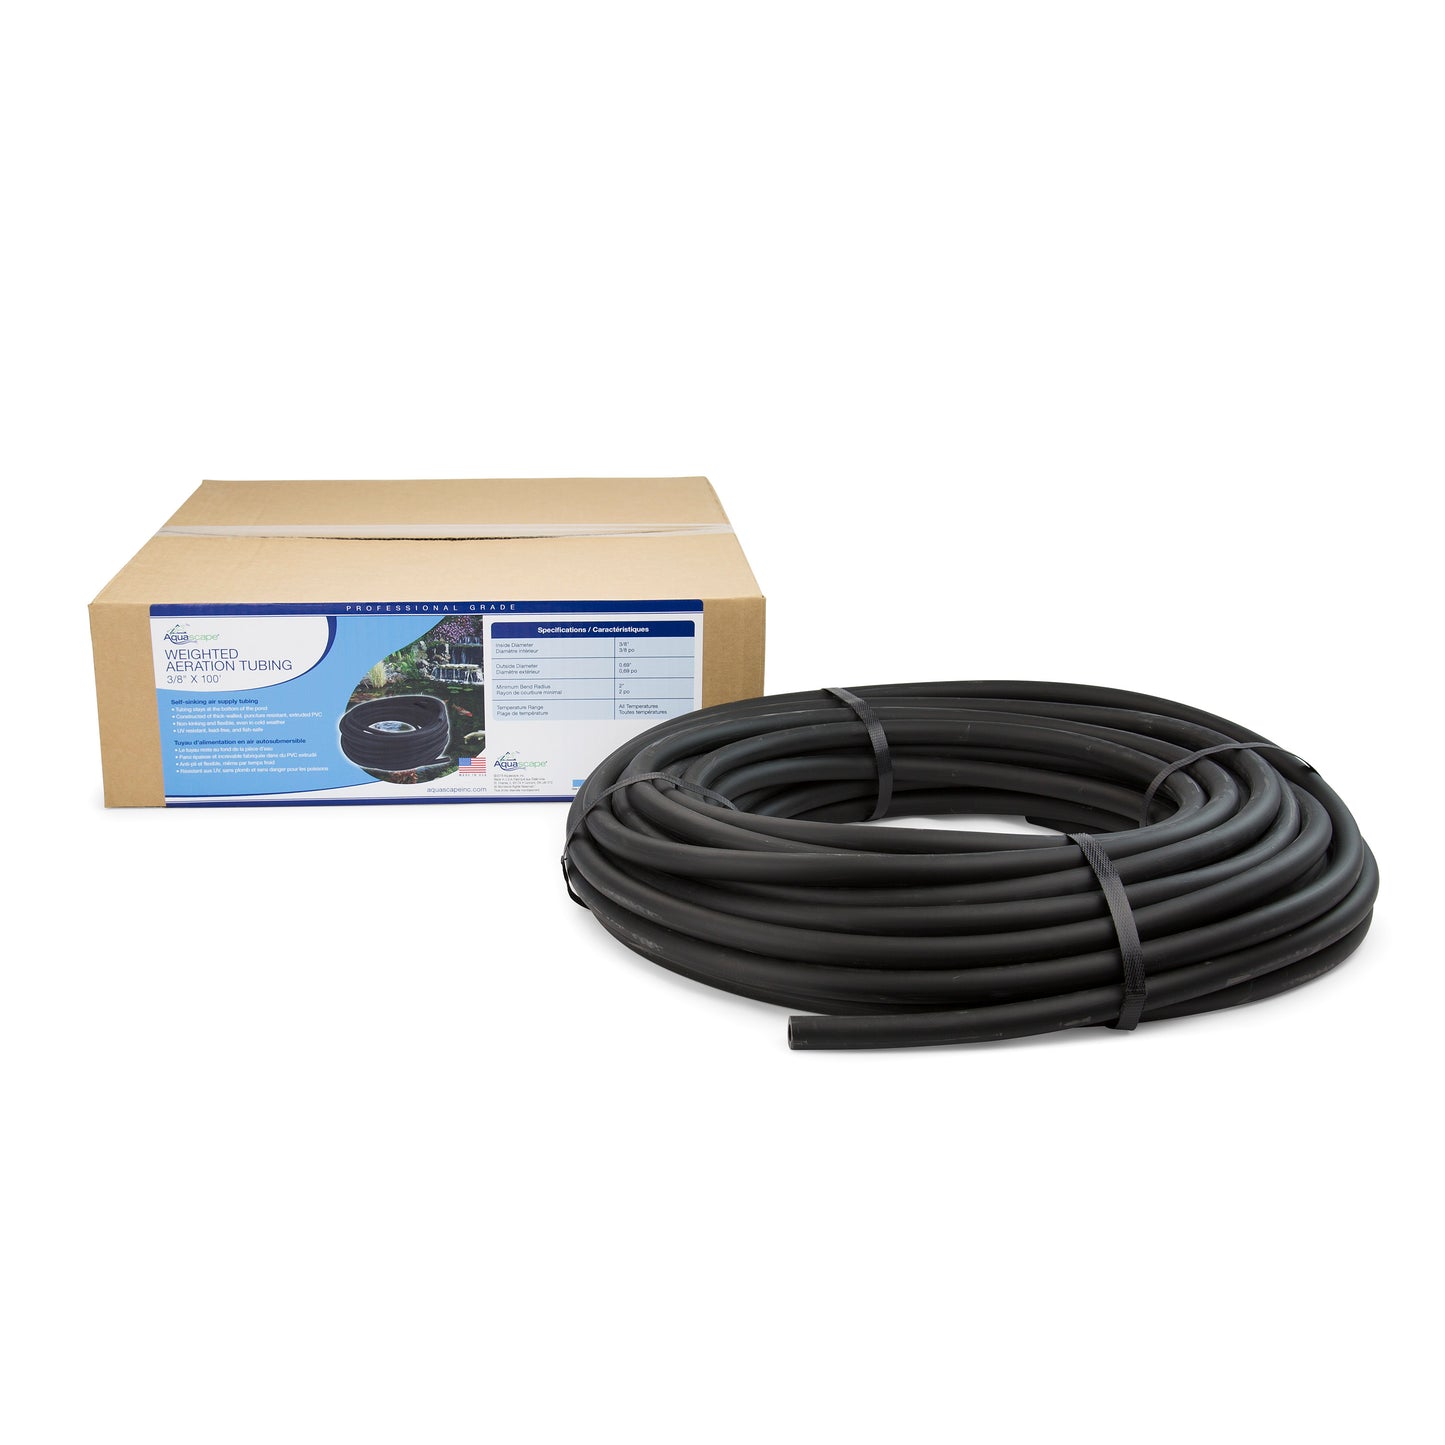 Weighted Aeration Tubing 3/8" x 100'